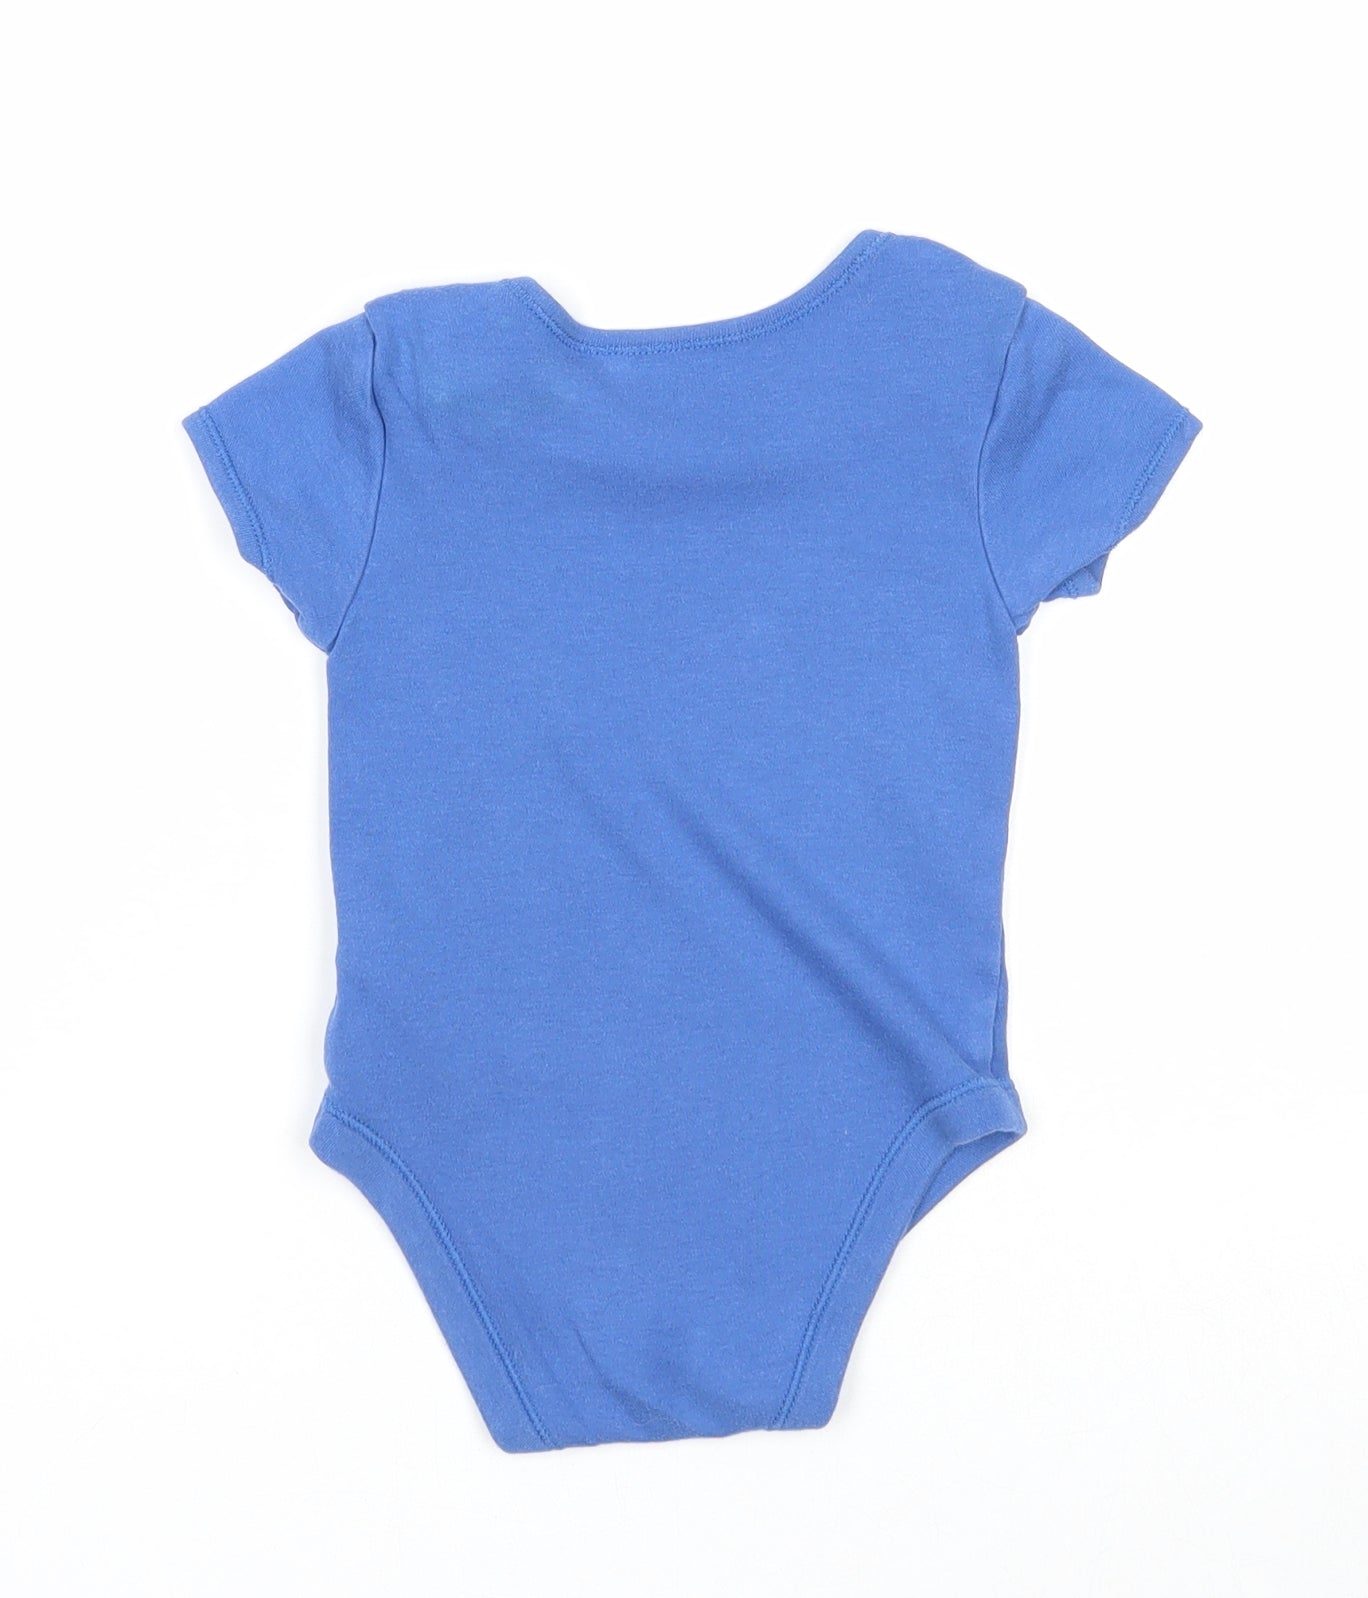 Primark Boys Blue Cotton Babygrow One-Piece Size 18-24 Months Snap - Play Today